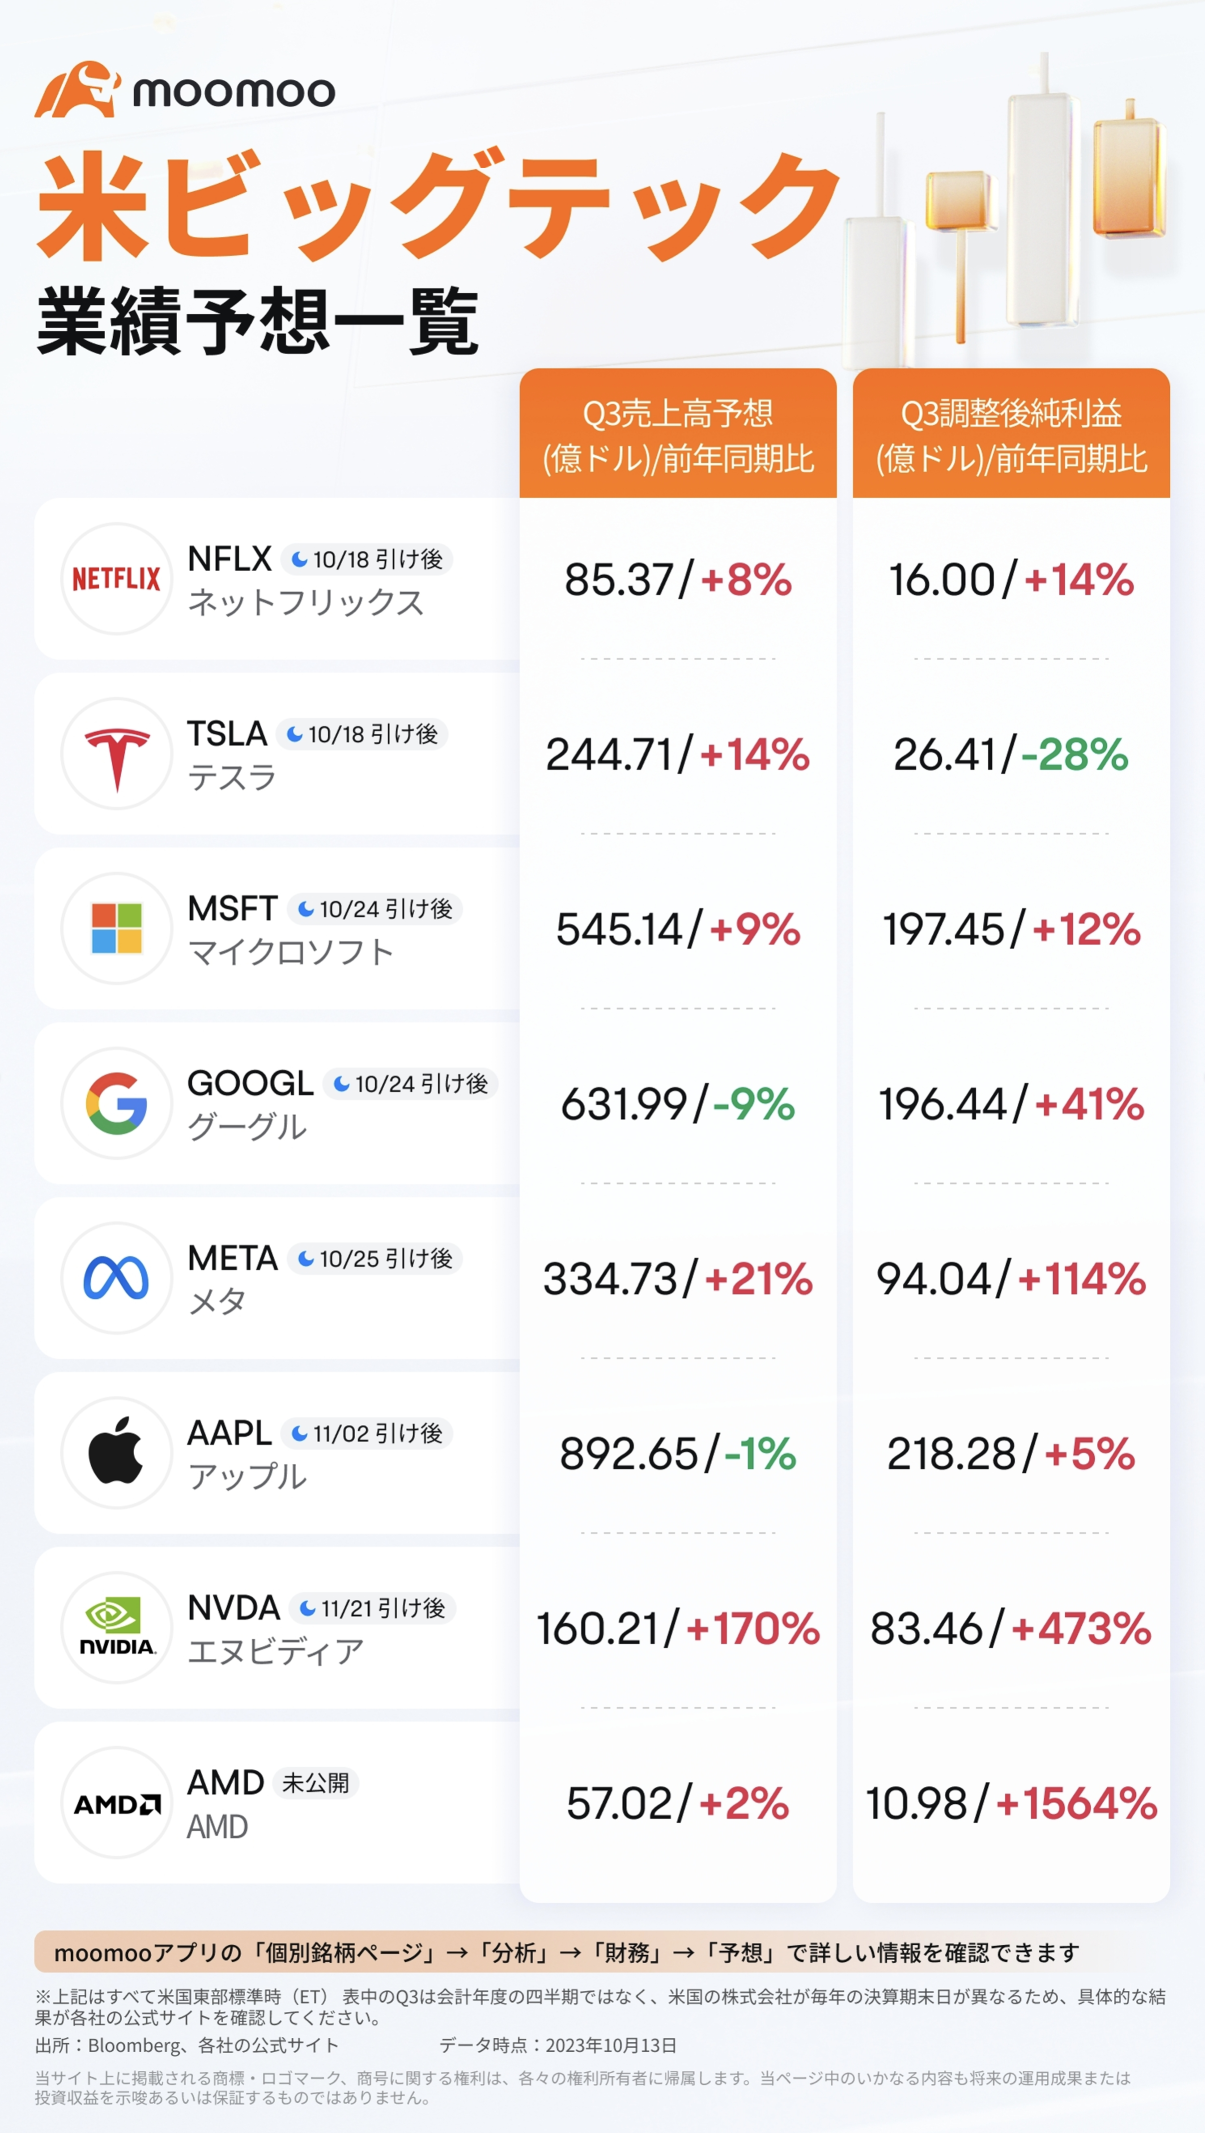 [Big Tech] Check out the list of market earnings forecasts scheduled to be announced by NFLX and TSLA at dawn on the 19th (Thursday) this week Japan time now!